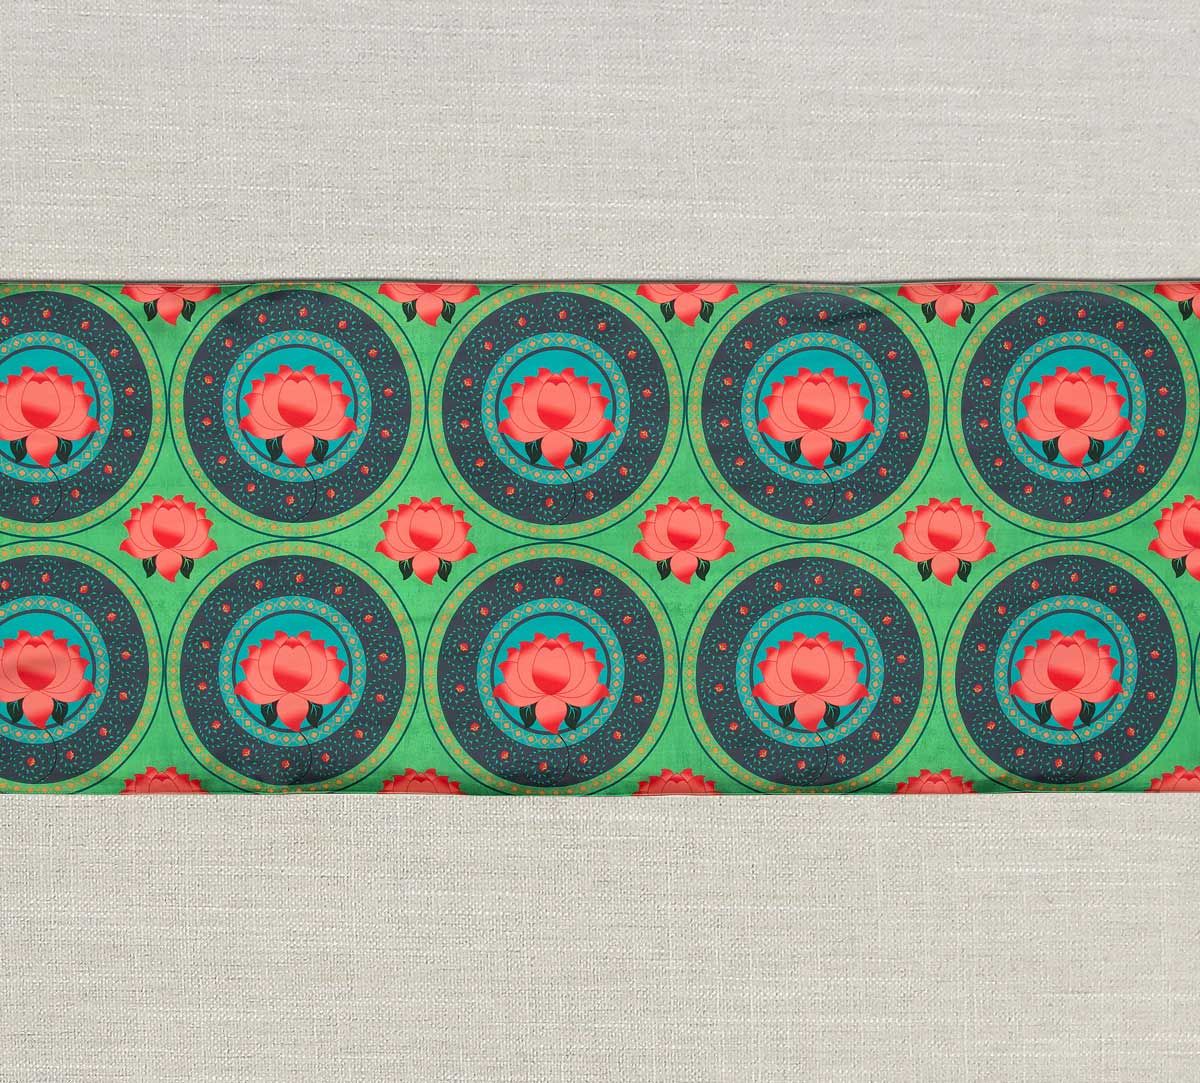 India Circus Platter Symmetry Bed and Table Runner